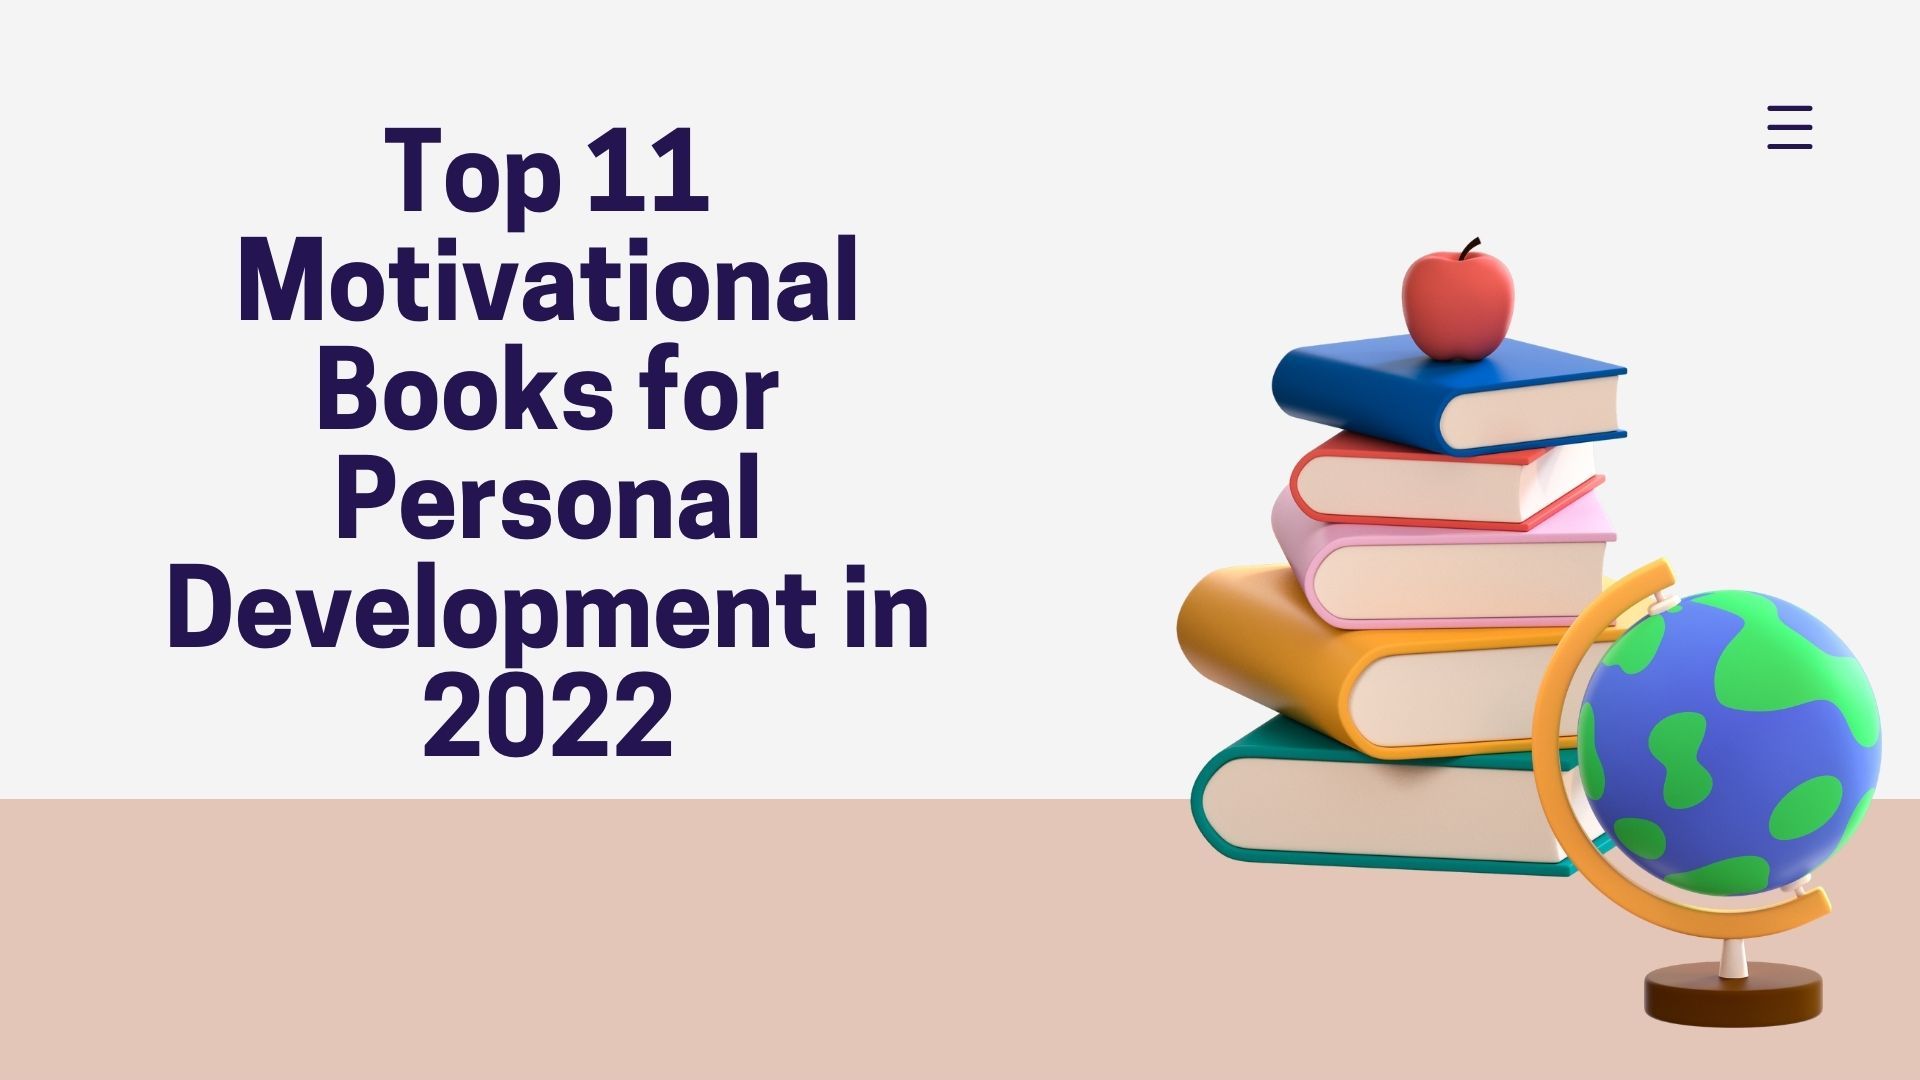 Top 11 Motivational Books for Personal Development in 2022